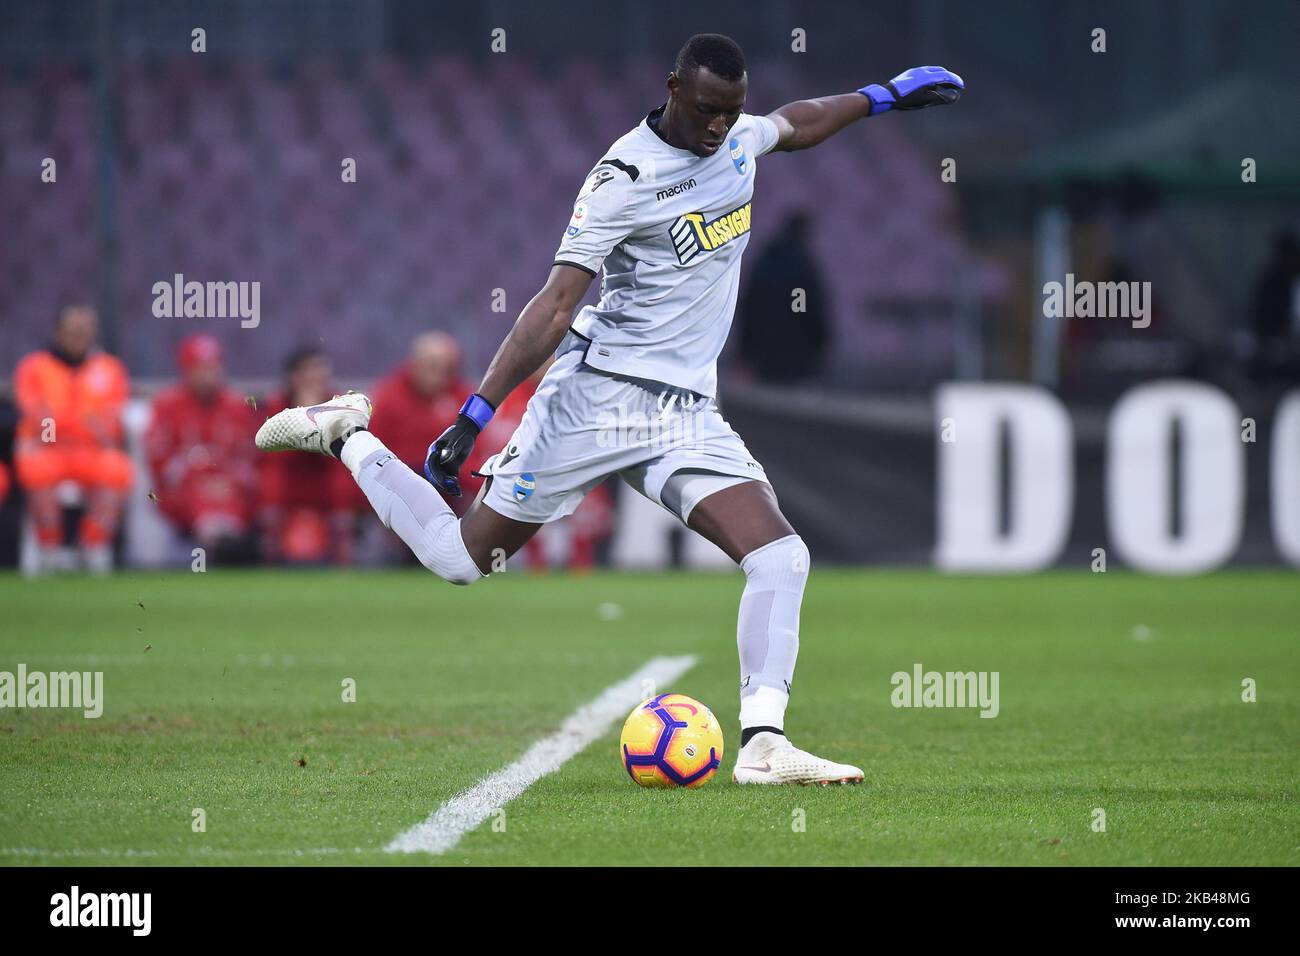 Alfred Gomis of Spal during the Serie A TIM match between SSC Napoli and Spal at Stadio San Paolo Naples Italy on 22 December 2018. (Photo Franco Romano) Stock Photo